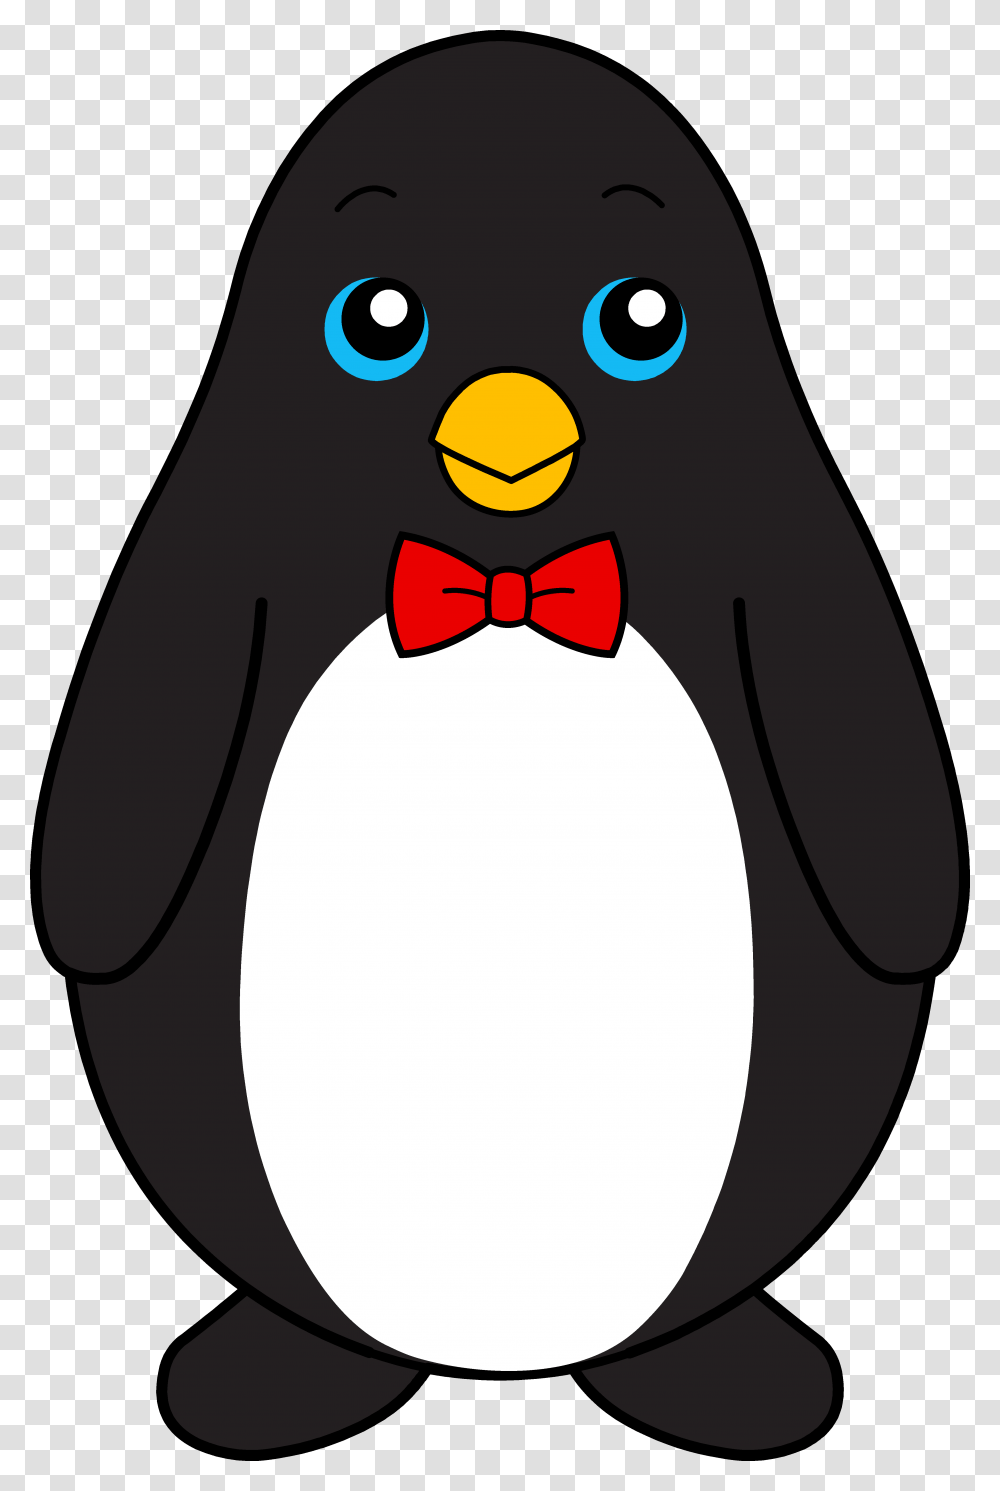 Penguin In A Bow Tie, Bird, Animal, King Penguin Transparent Png